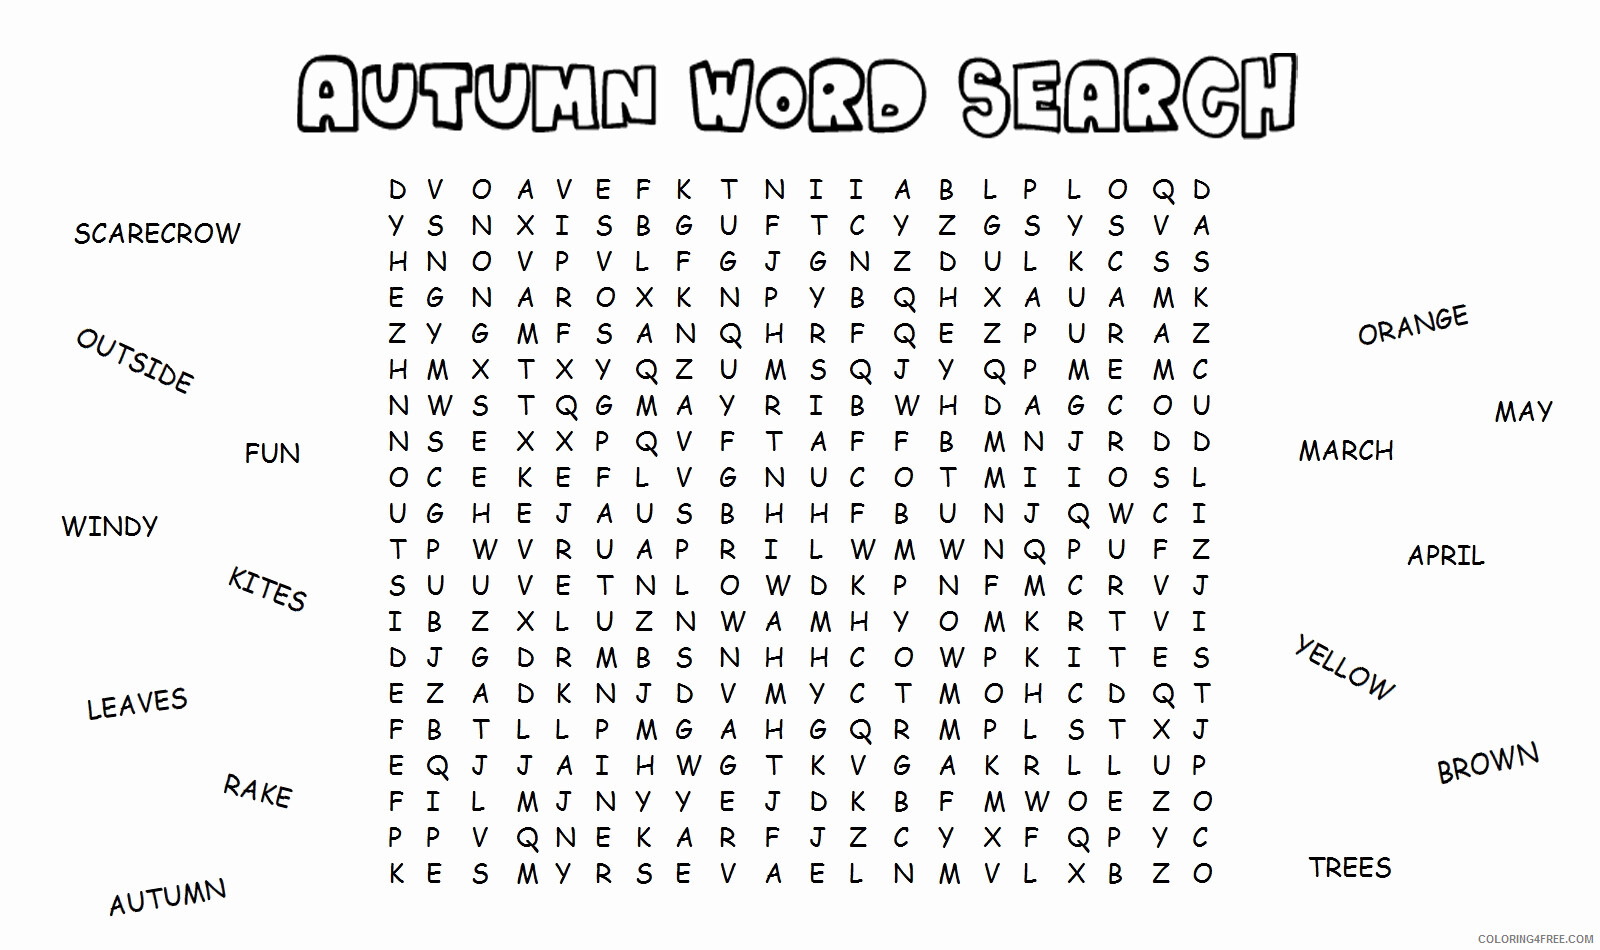 Word Search Puzzle Coloring Pages Autumn Word Search Printable 2021 6330 Coloring4free